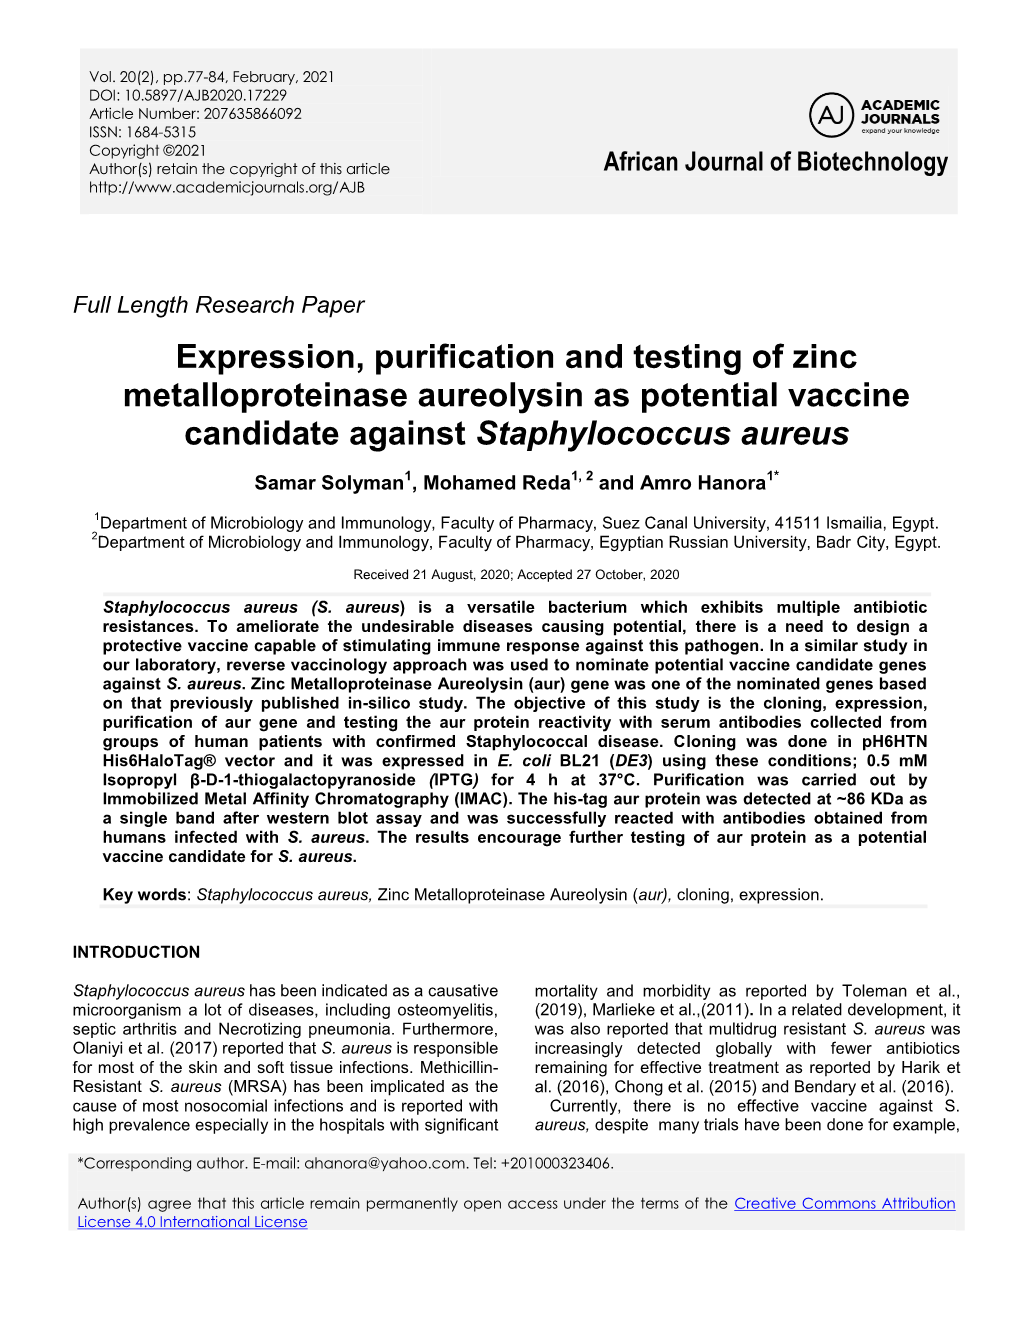 Expression, Purification and Testing of Zinc Metalloproteinase Aureolysin As Potential Vaccine Candidate Against Staphylococcus Aureus